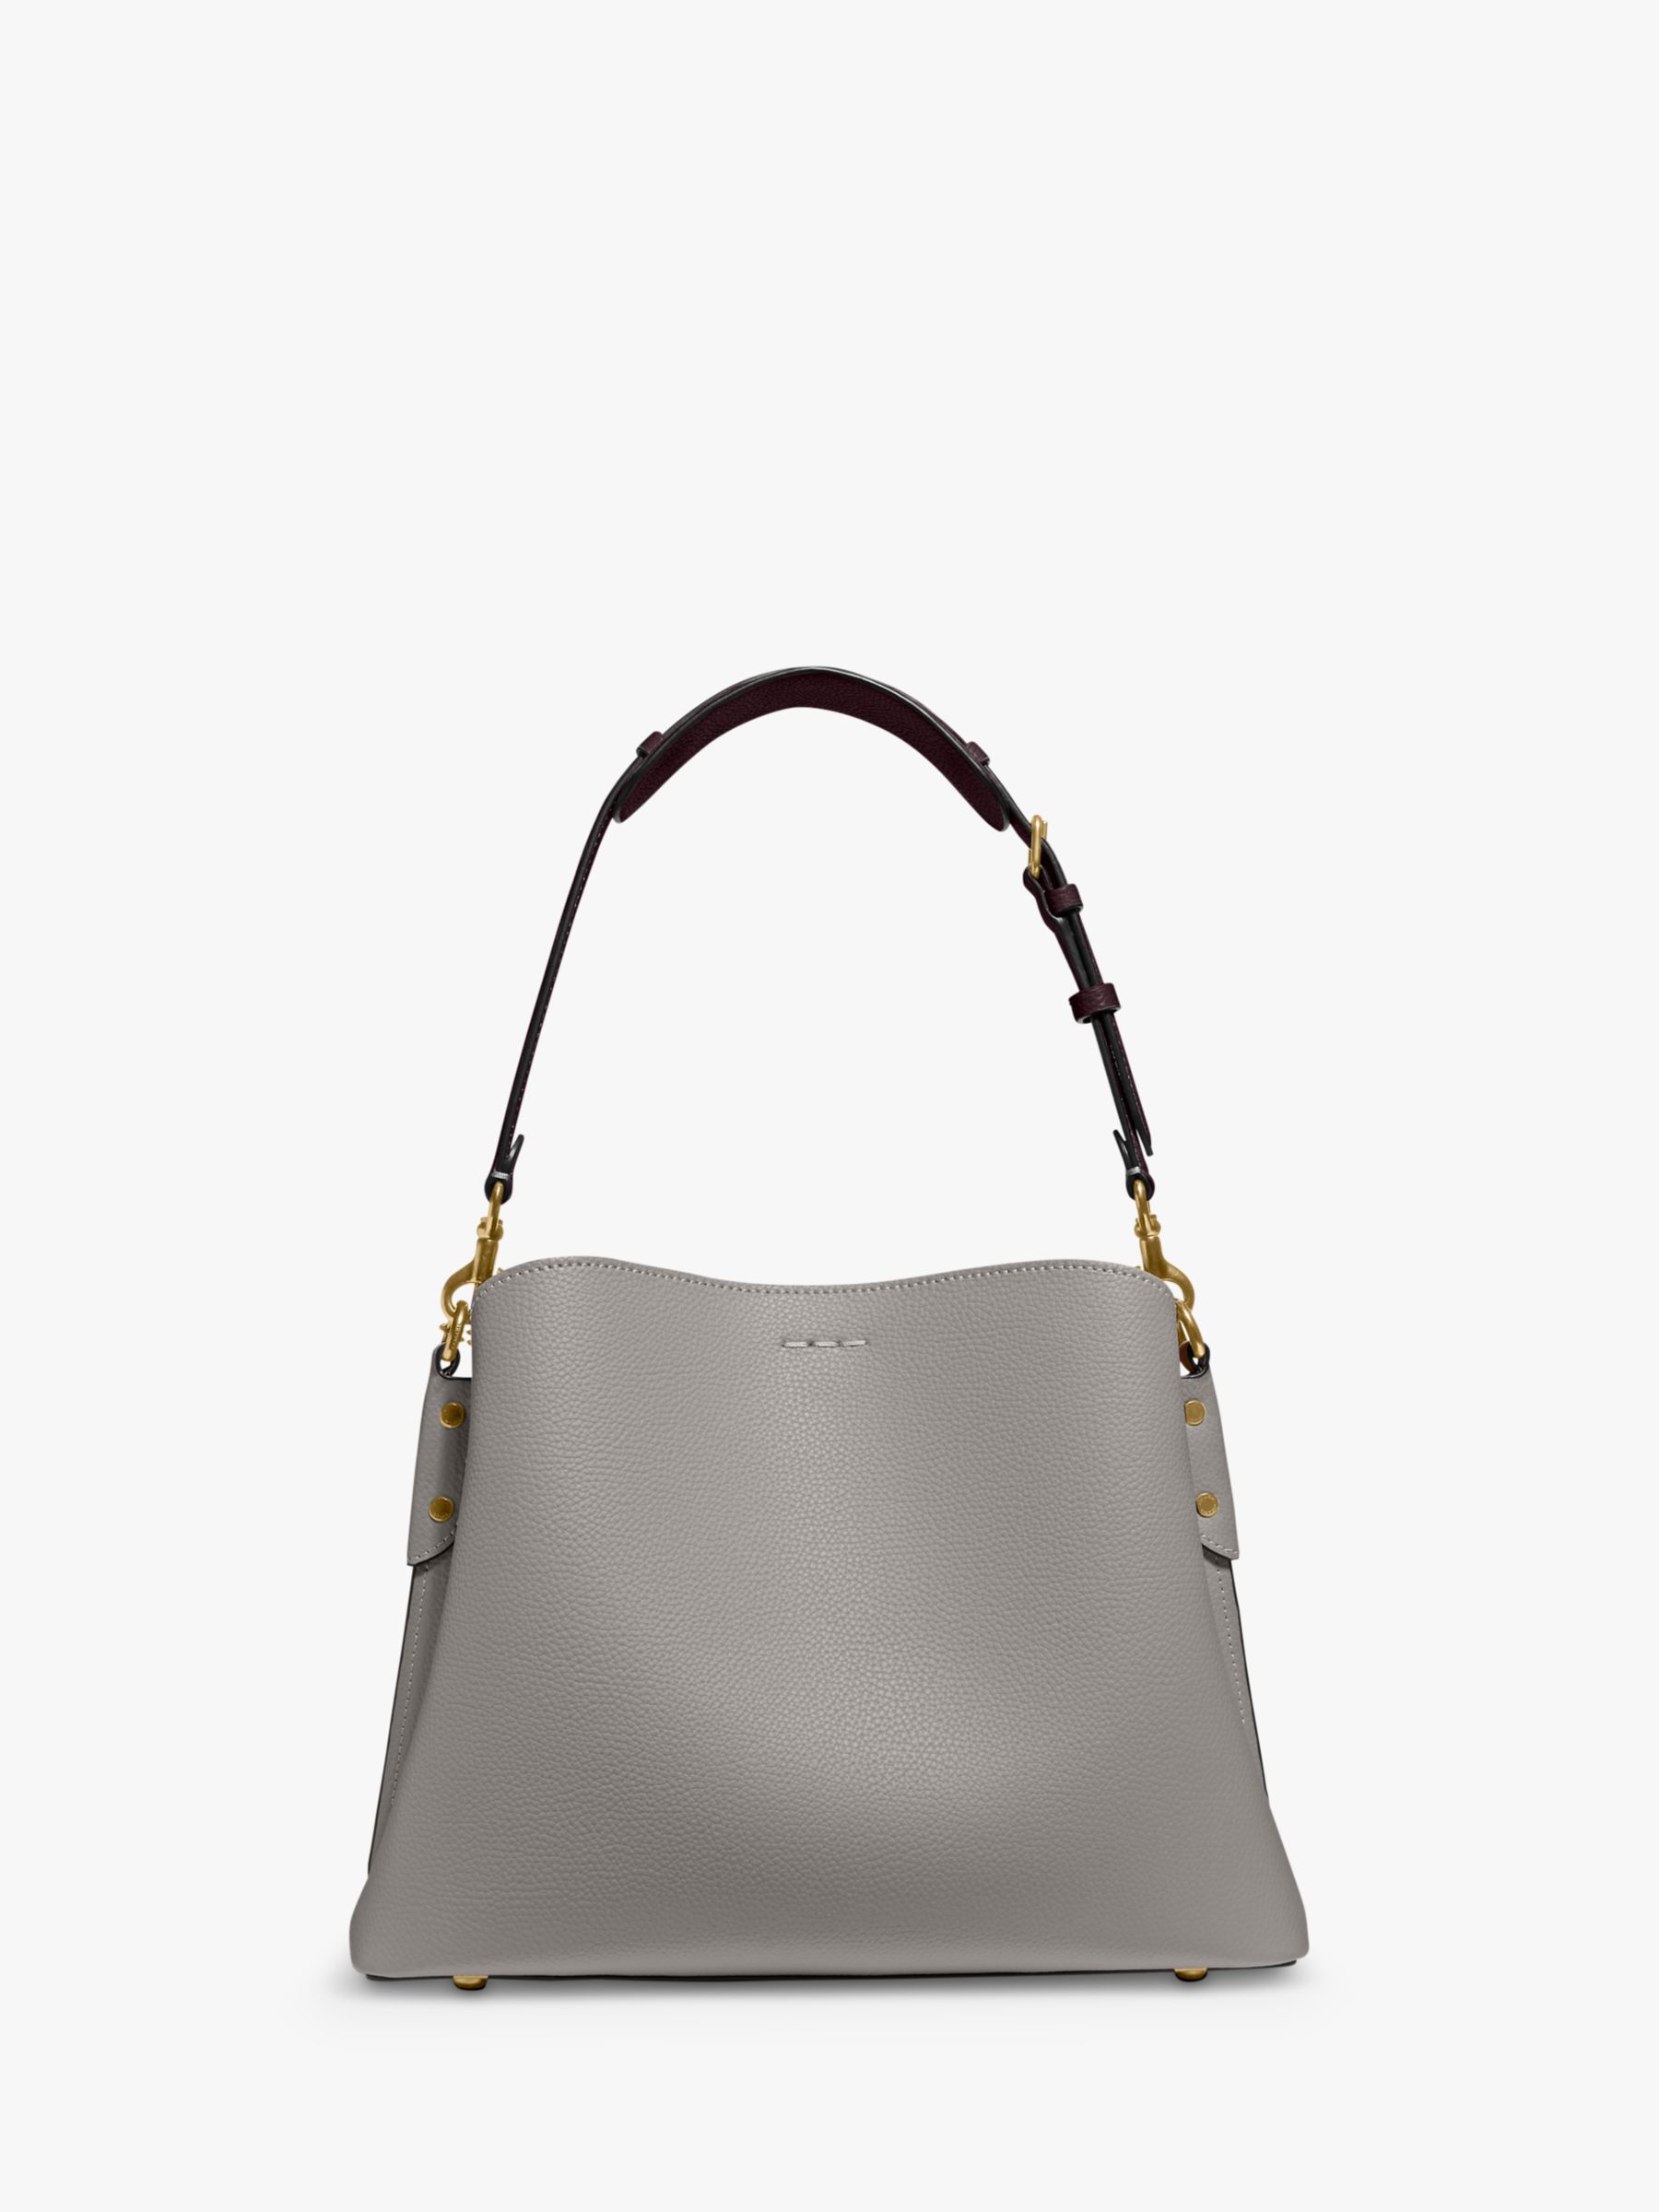 Coach Willow Leather Shoulder Bag, Dove Grey at John Lewis & Partners